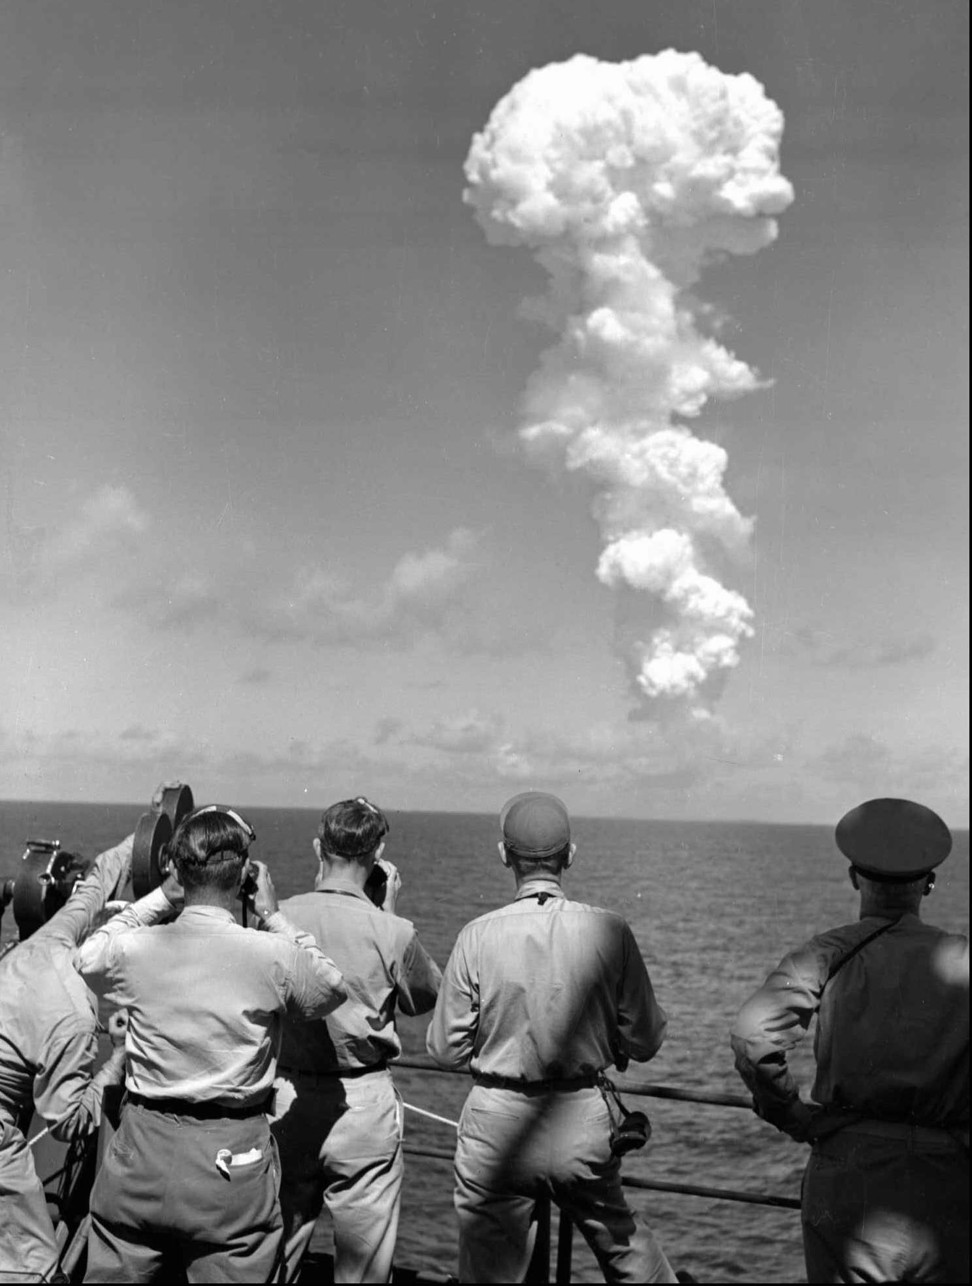 Photographers and observers on the bridge of the USS Mount McKinley watch a huge cloud mushroom over Bikini Atoll in the Marshall Islands on July 1, 1946, following an atomic test. Bikini Atoll would, in 1954, be the site of the world’s first hydrogen bomb test, and the islands are still considered uninhabitable today. Photo: AP